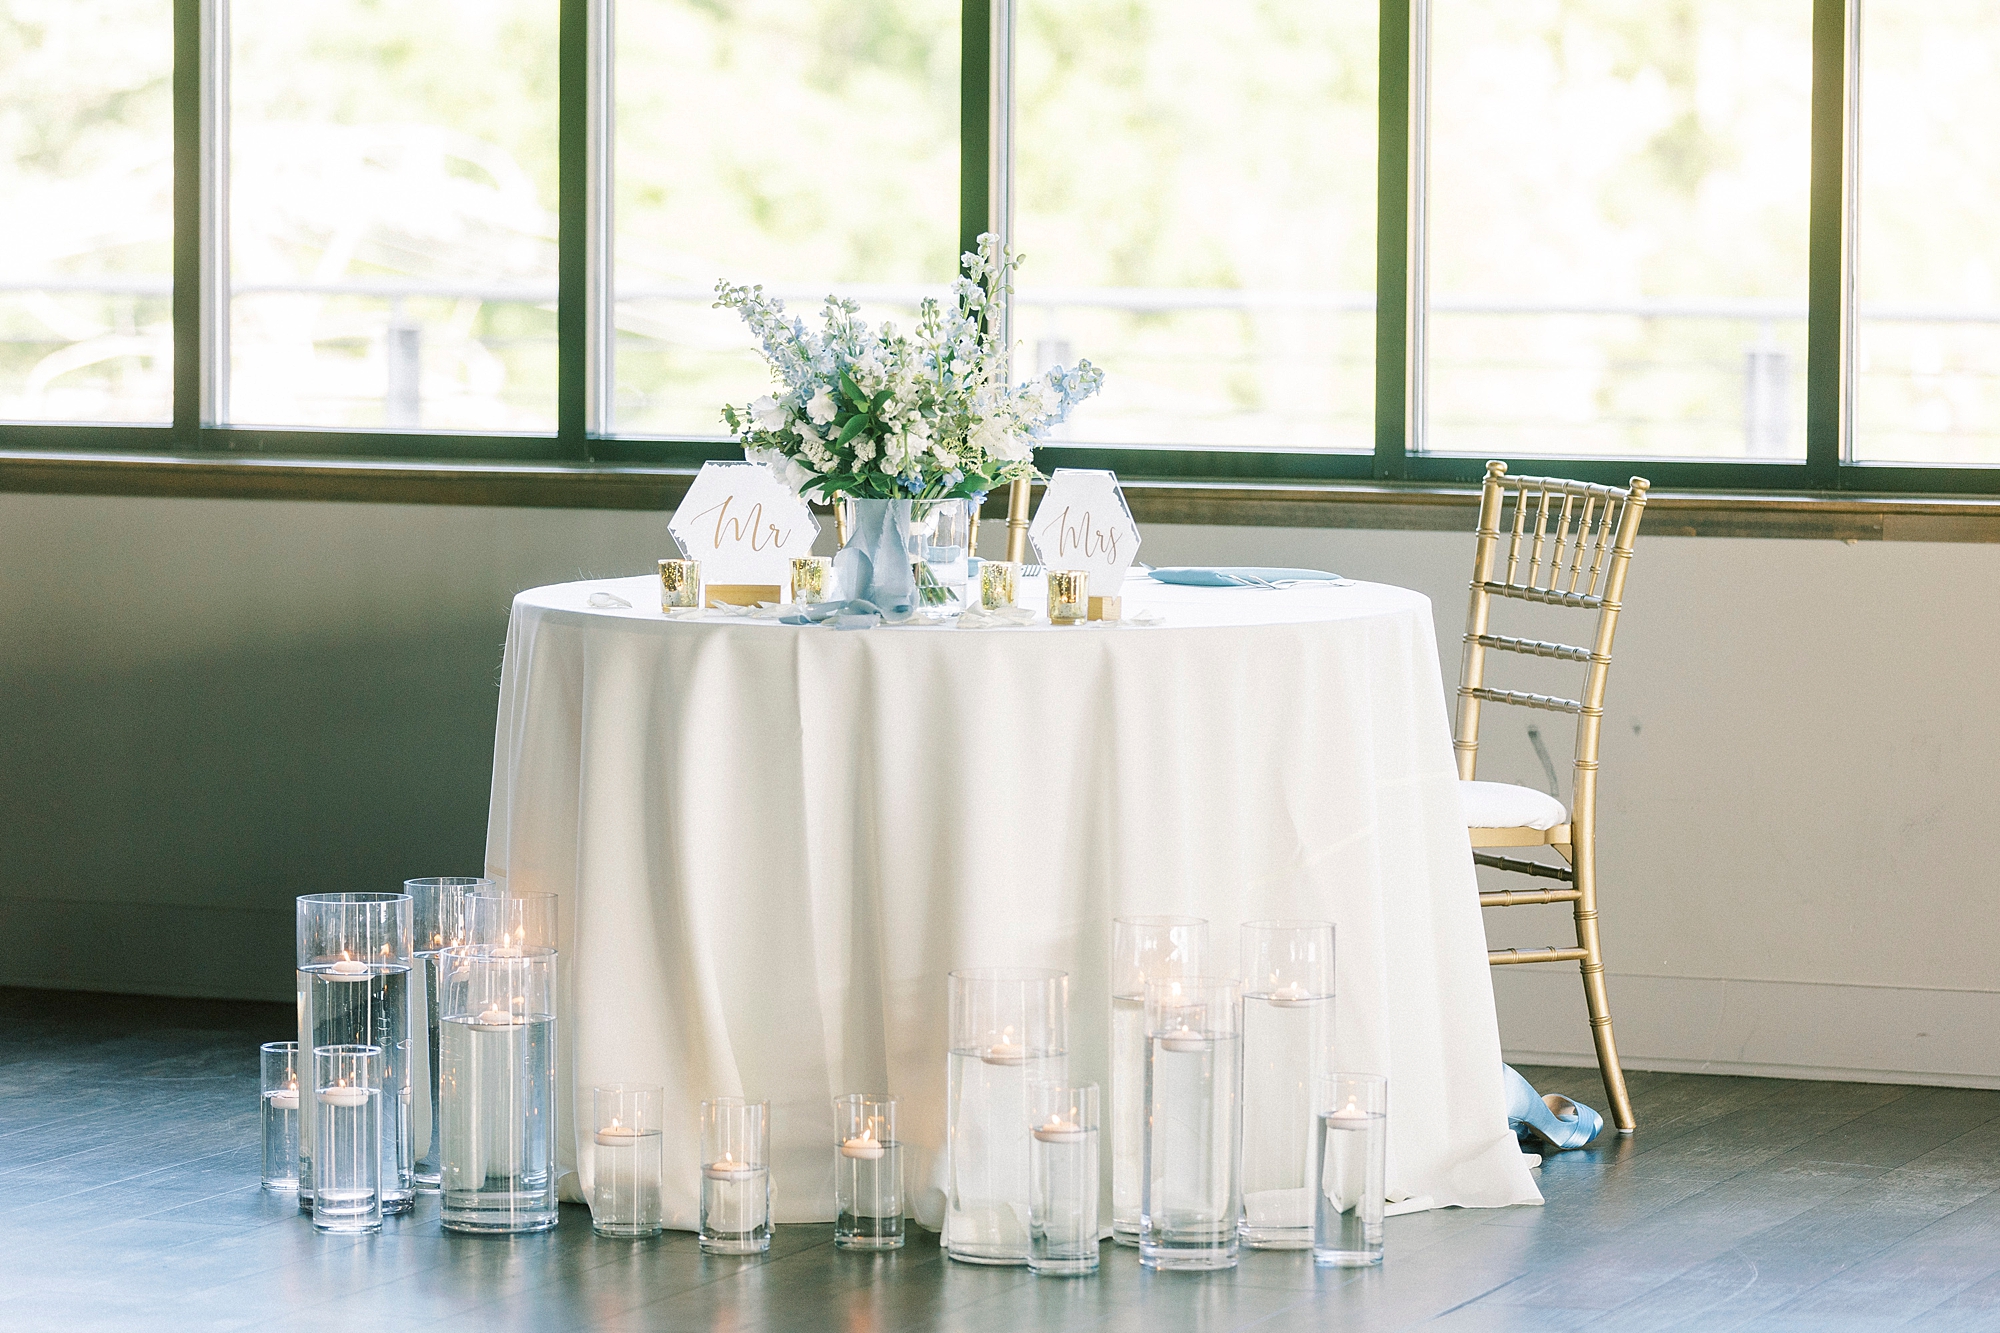 sweetheart table with white tablecloth, vases on floor with floating candles and blue and white bouquet on top